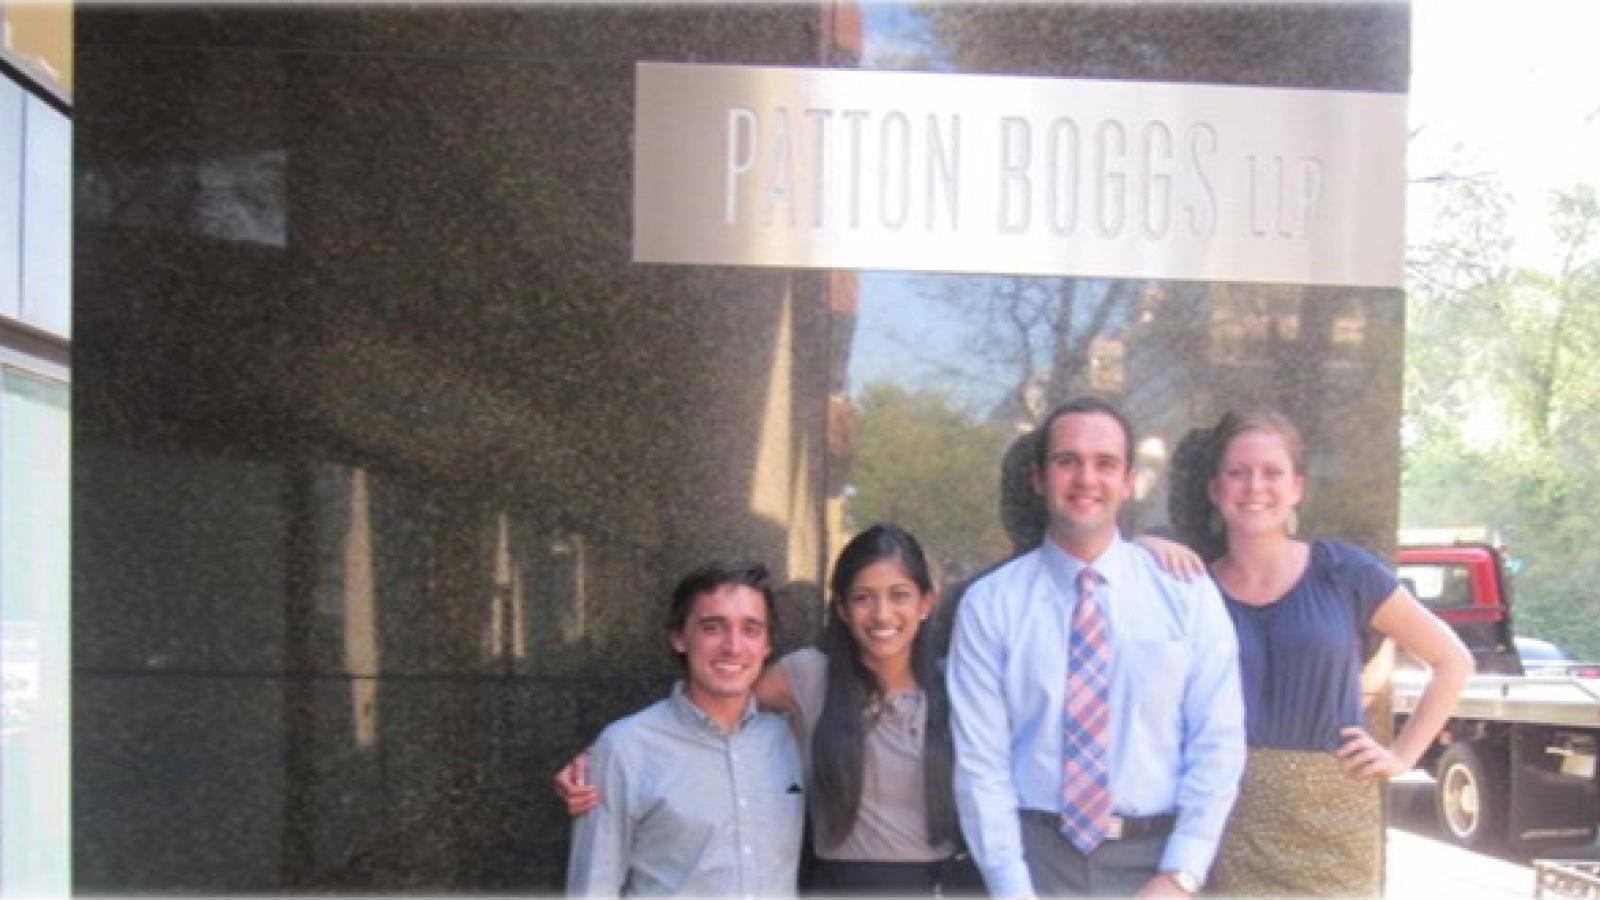 Stephen K. Pytlik (left) in front of the law firm where he interned during the summer.